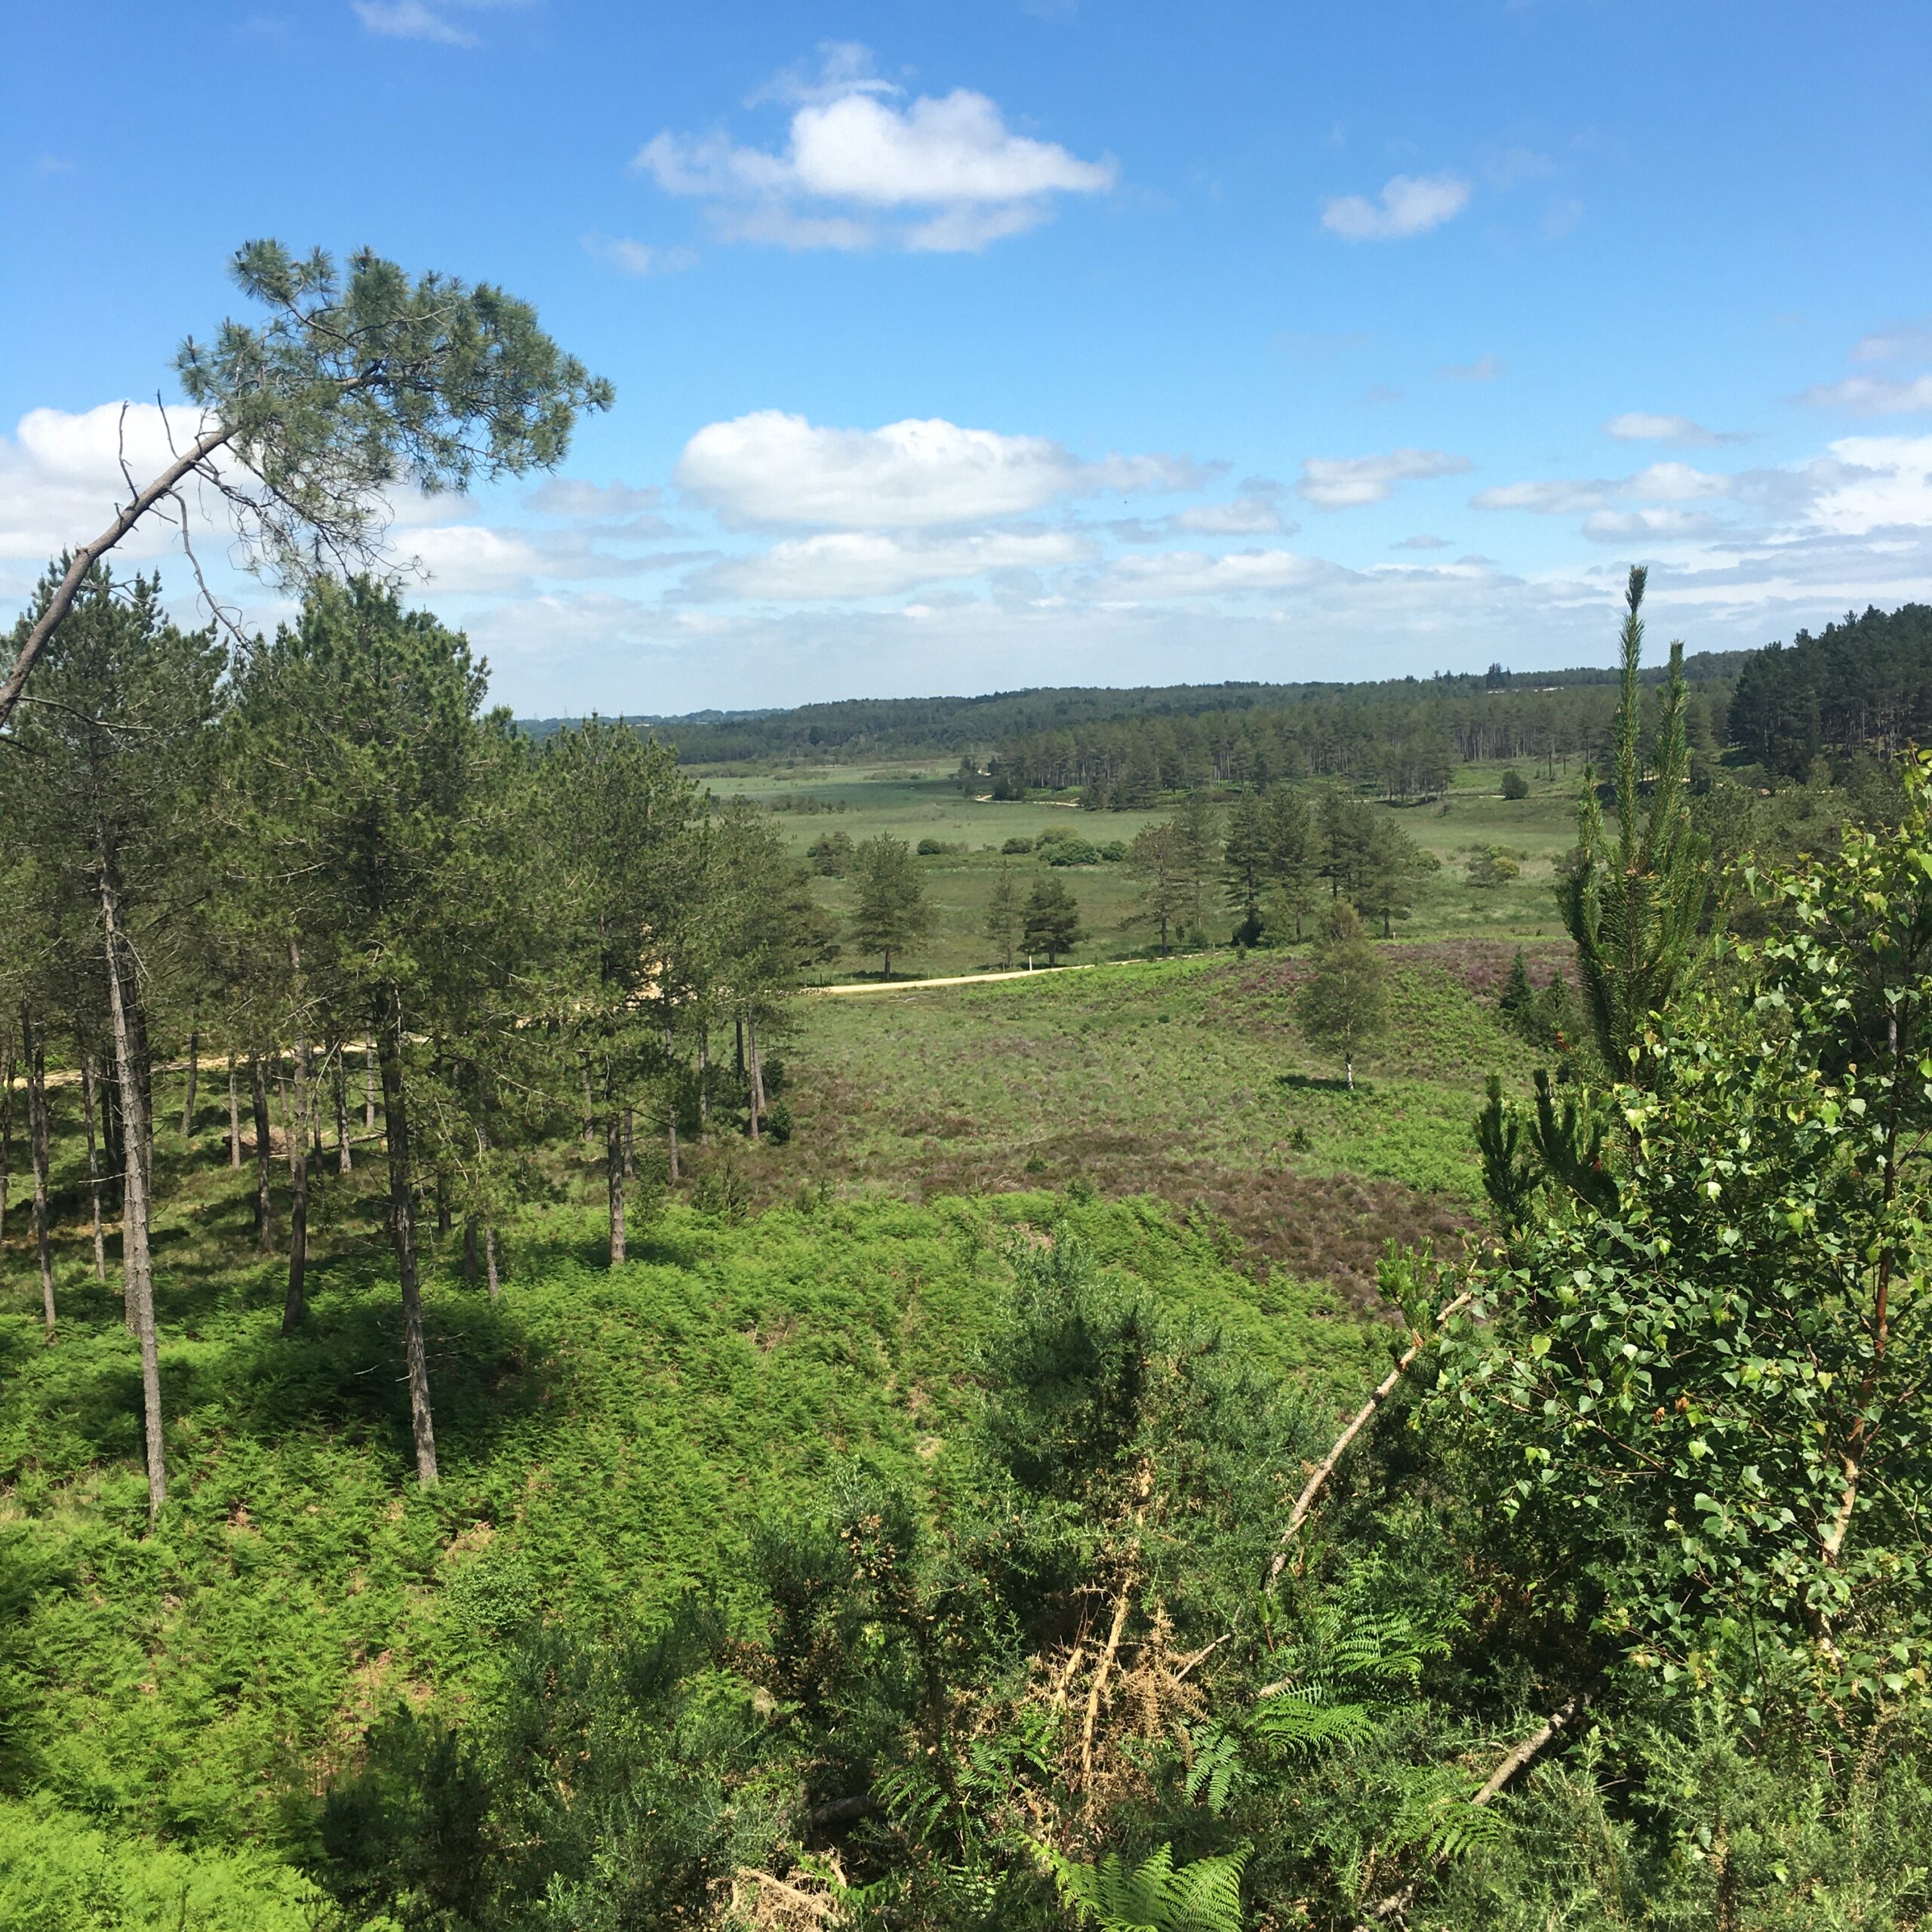 At the viewpoint in Wareham Forest, part of our 3 Walks from our Wareham B&B